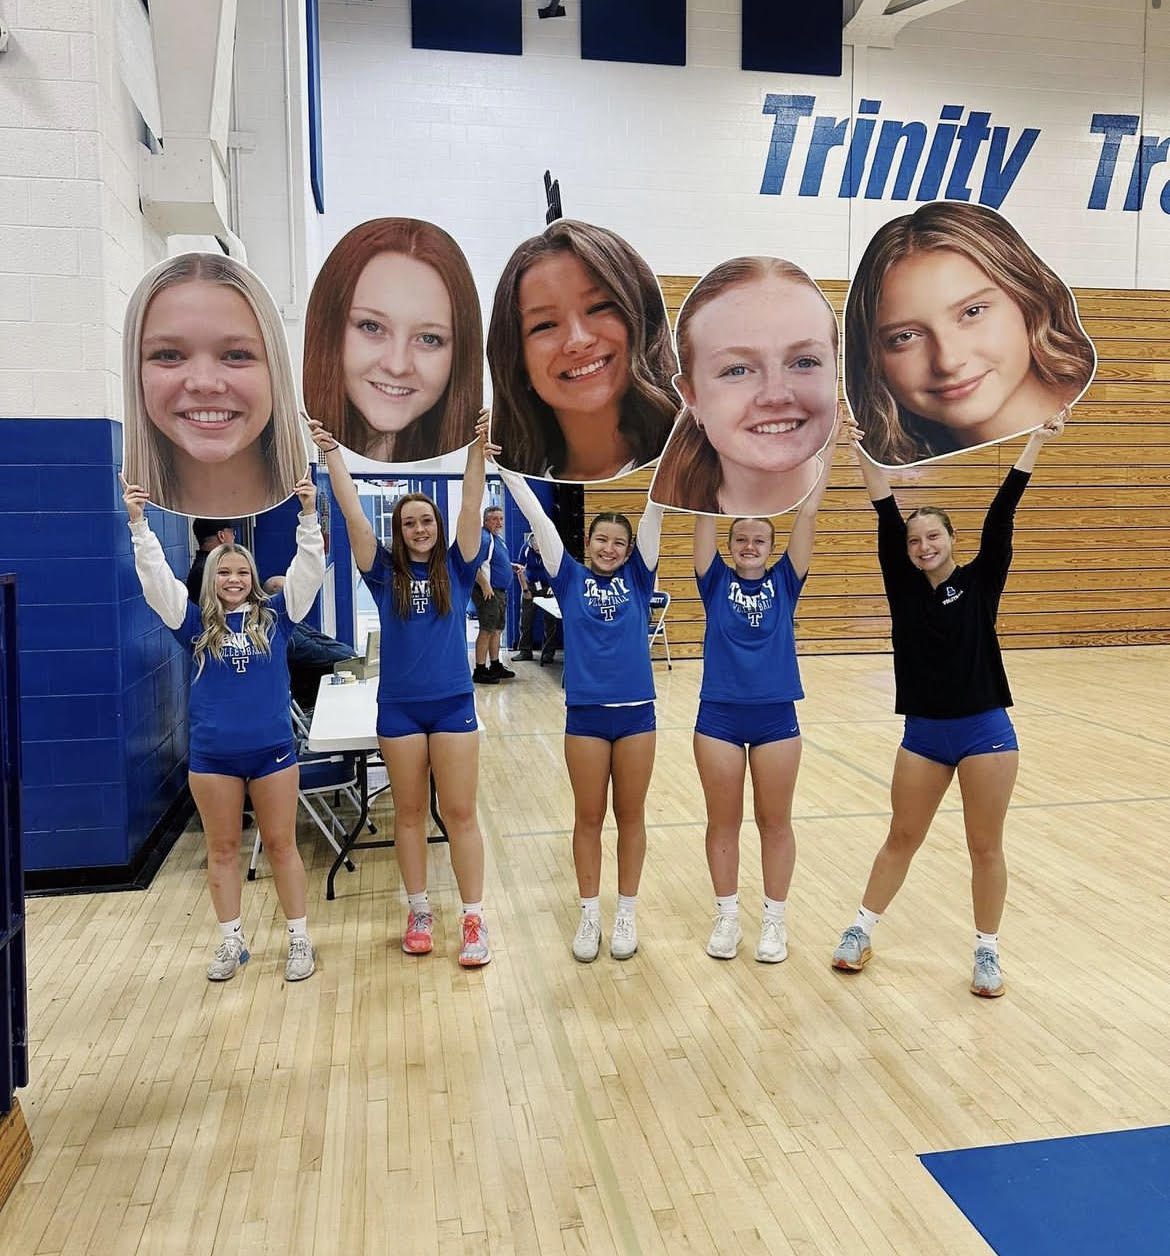 The senior girls on the volleyball team hold up their “fat heads” at their game. Their senior night took place on October 26 with a score of 3-0. 